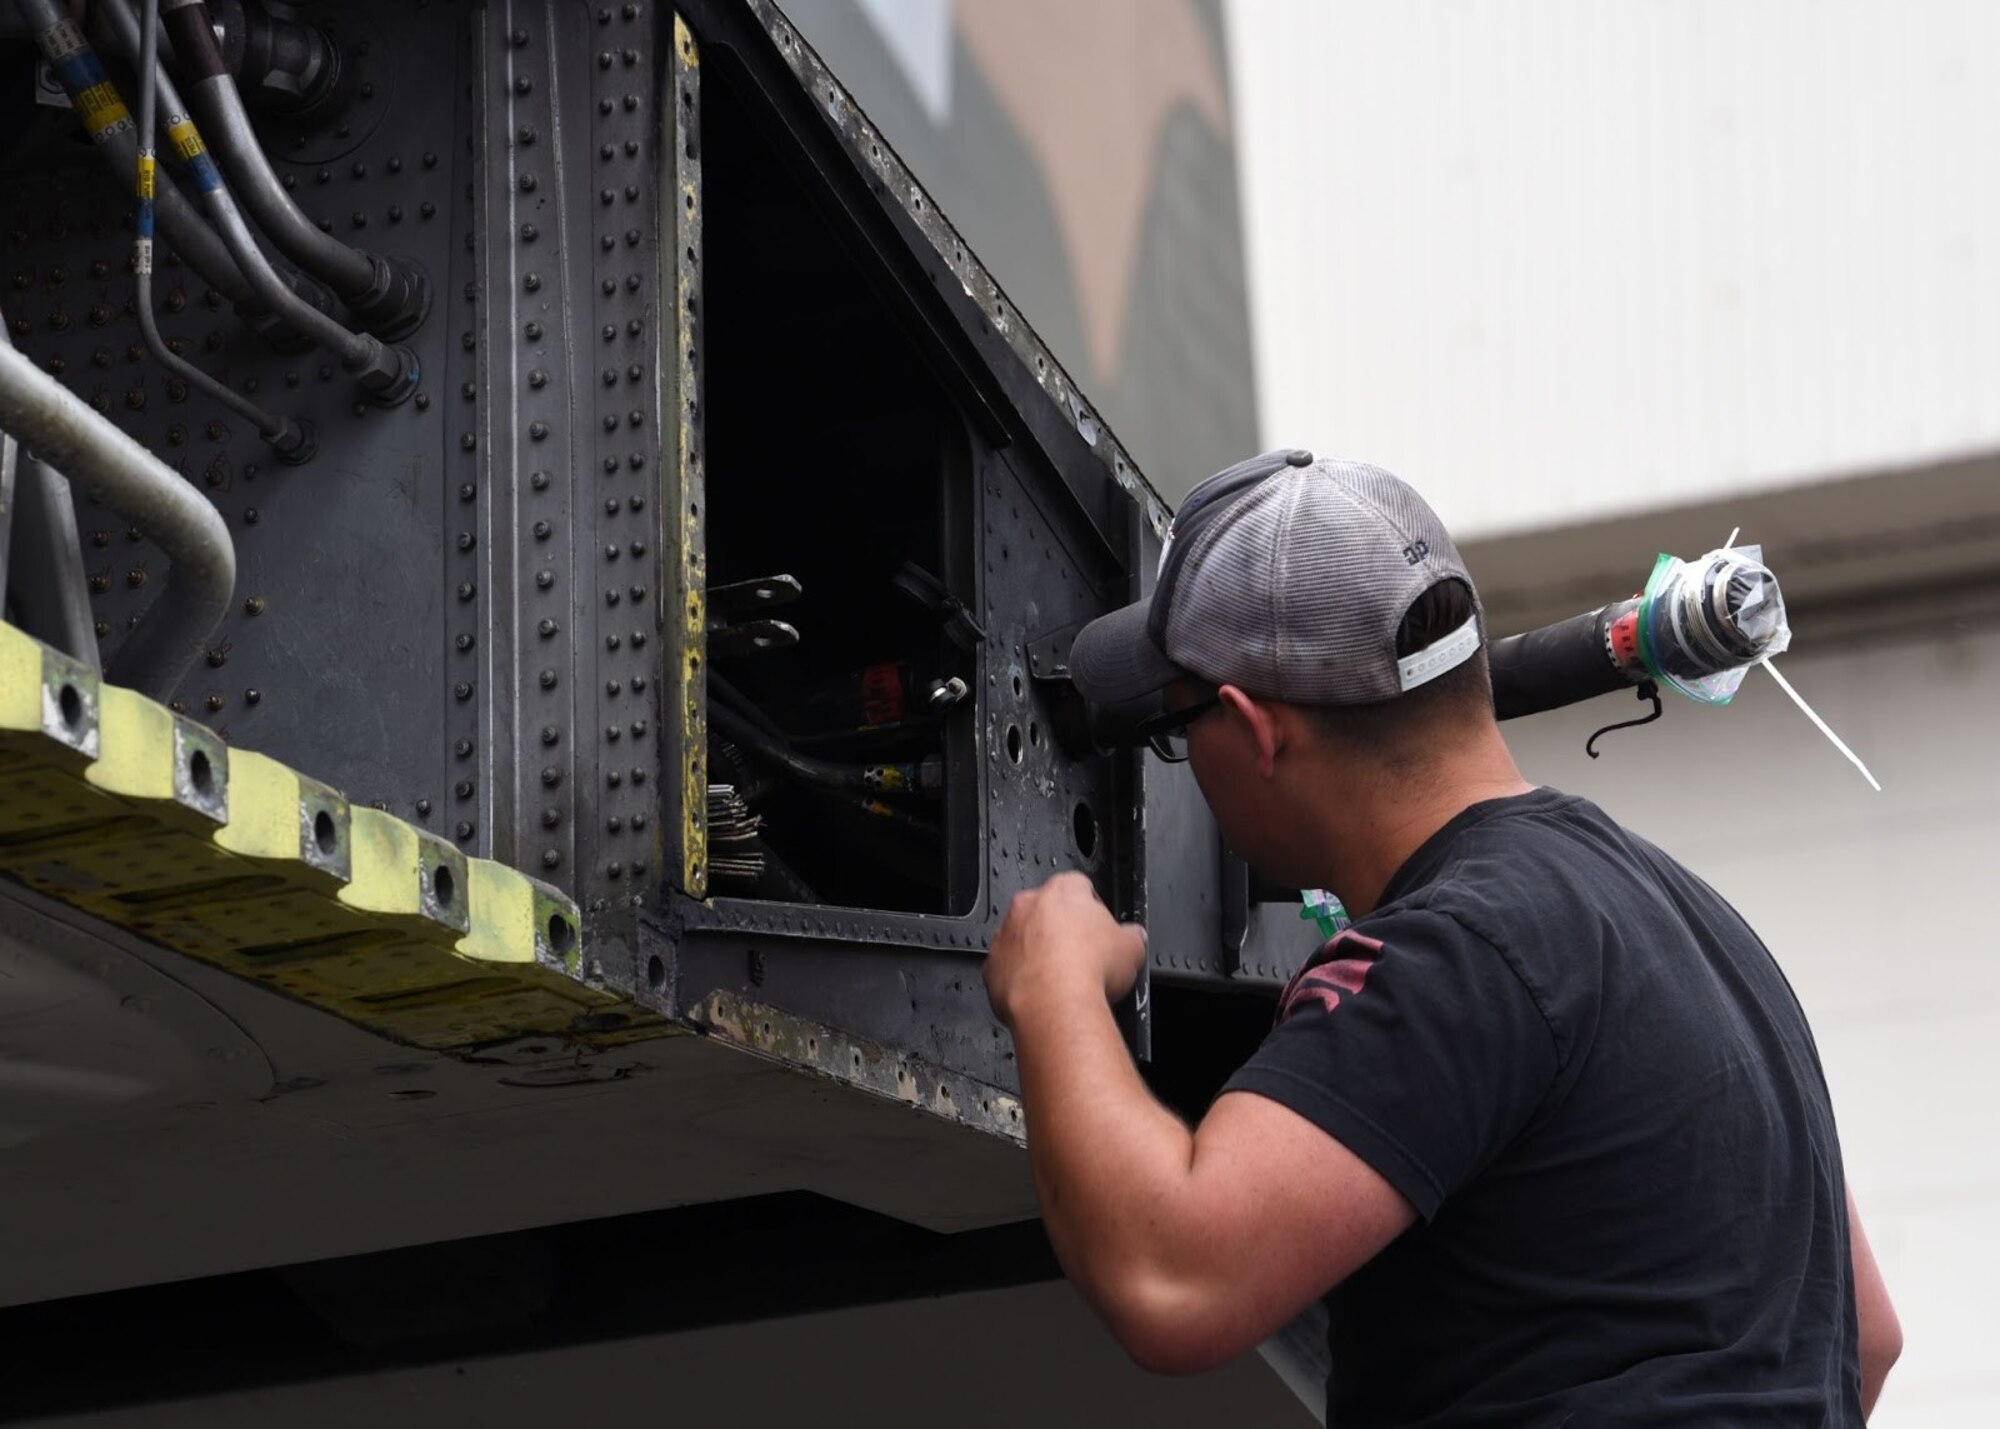 U.S. Air Force Senior Airman Jacob Scott, 62nd Aircraft Maintenance Squadron crew chief, works on a C-130E Hercules at Joint Base Lewis-McChord, Washington, June 13. 2021. The 62nd AMXS worked alongside several other units in order to coordinate and carry out the successful removal of the C-130’s wings, engine, fuel tanks, lower antennas and landing gear doors so the aircraft could be towed down the McChord Field flightline and put on display after restoration. The C-130 was restored by volunteers and will be the newest addition to the aircraft of McChord Air Museum on Heritage Hill. (U.S. Air Force photo by Senior Airman Zoe Thacker)